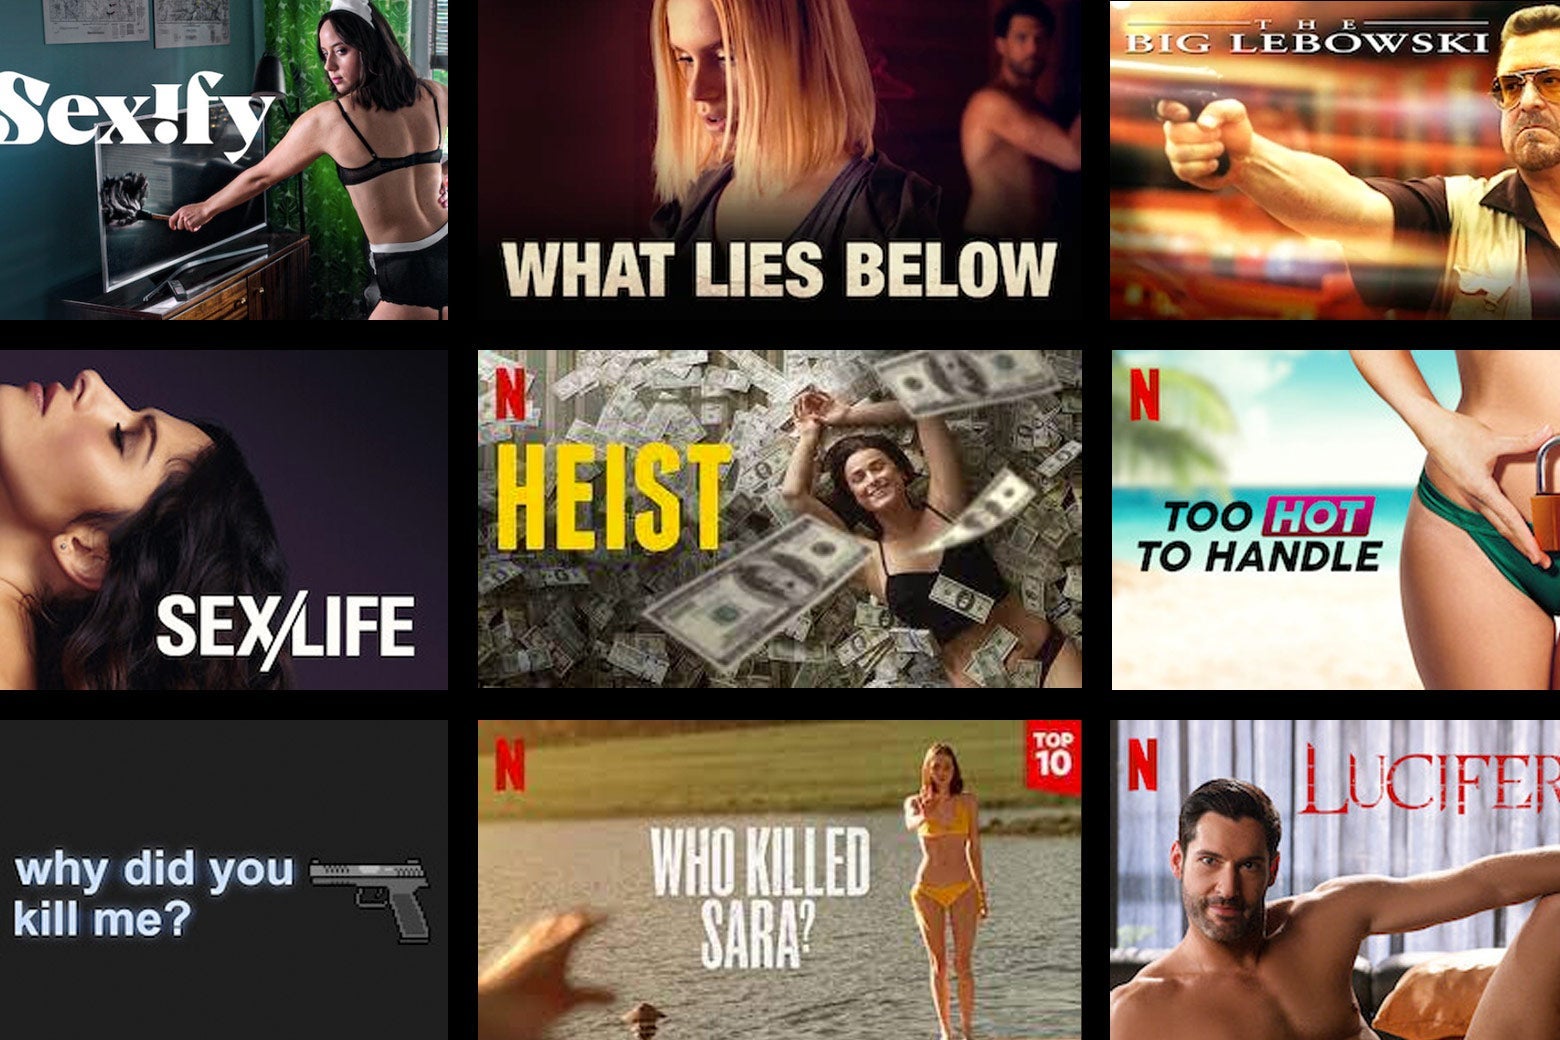 Thumbnails for Netflix shows and movies, including Sexify, What Lies Below, Heist, and Who Killed Sara?